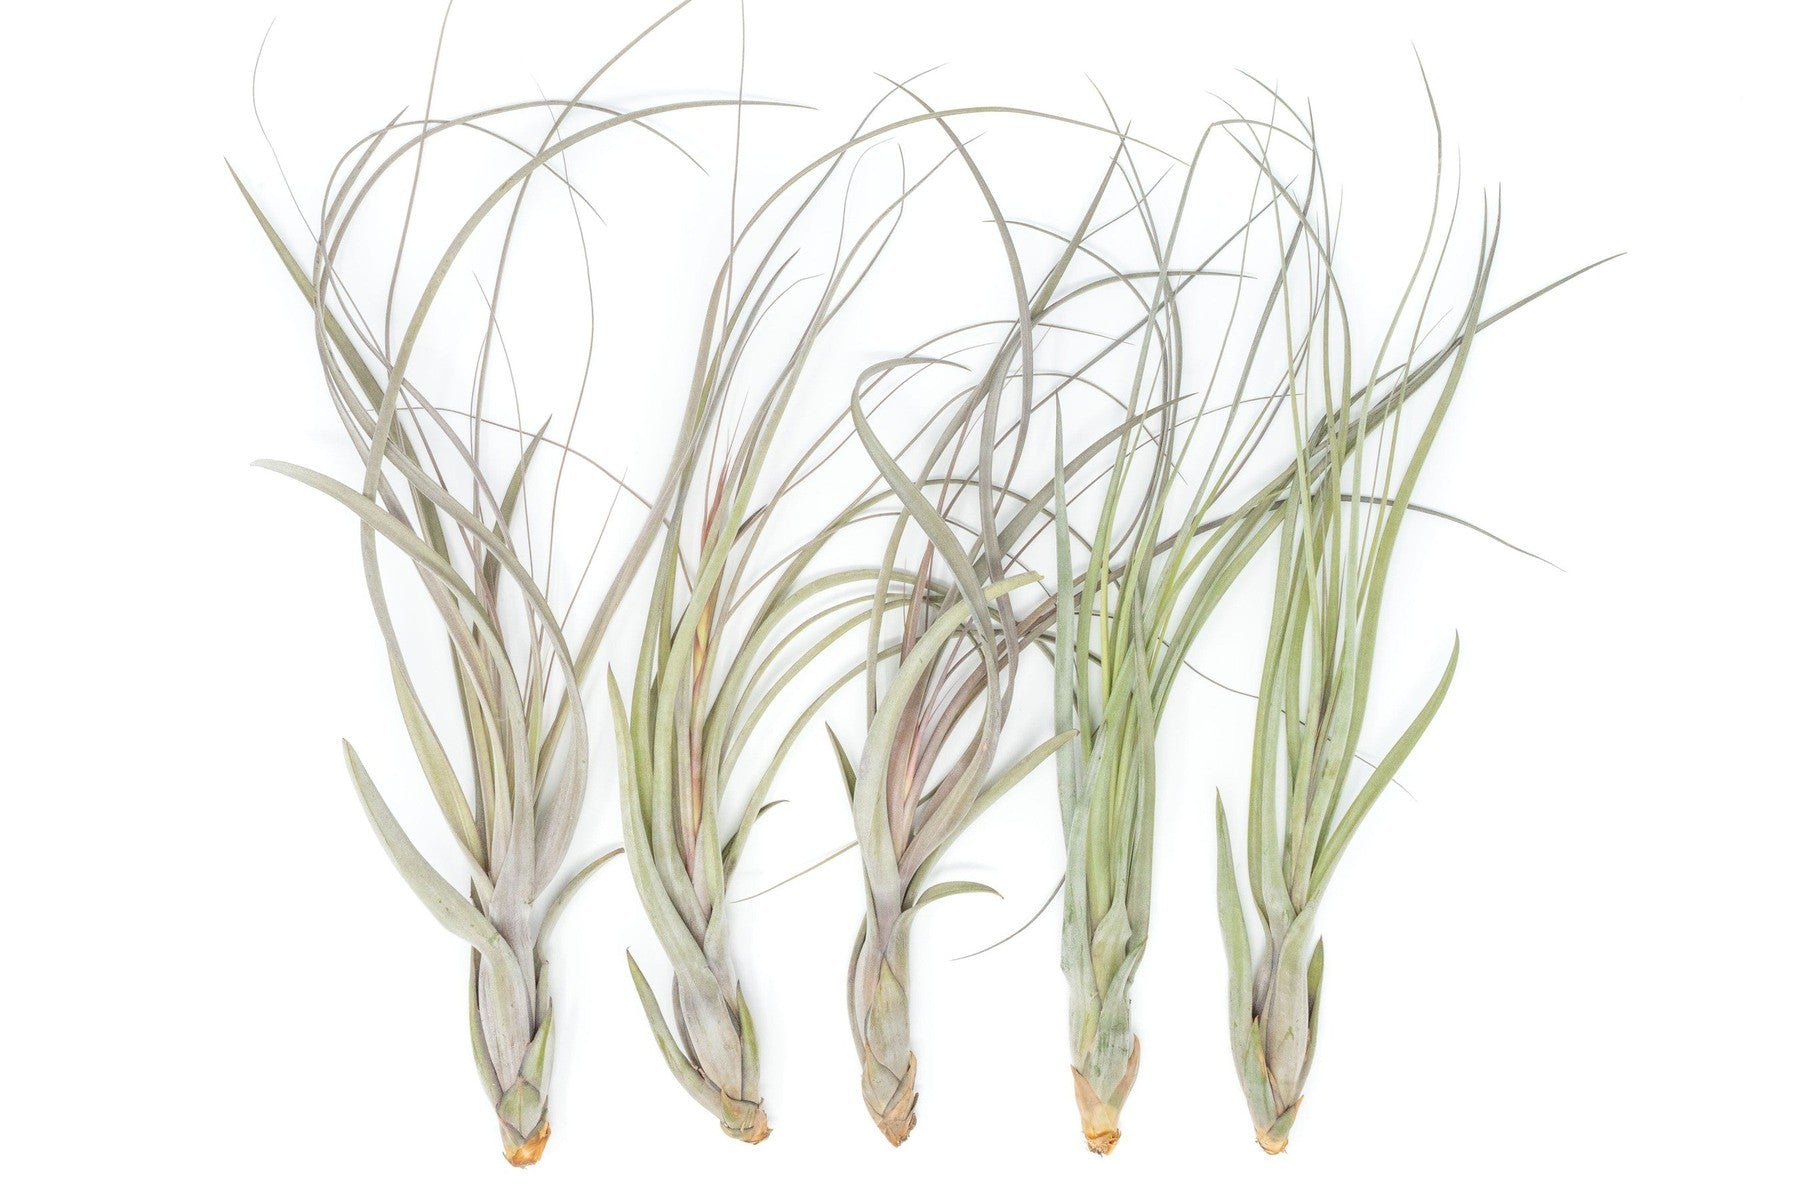 SALE - Large Tillandsia Balbisiana Air Plants - Set of 5 or 10 - 40% Off-airplant-The Succulent Source